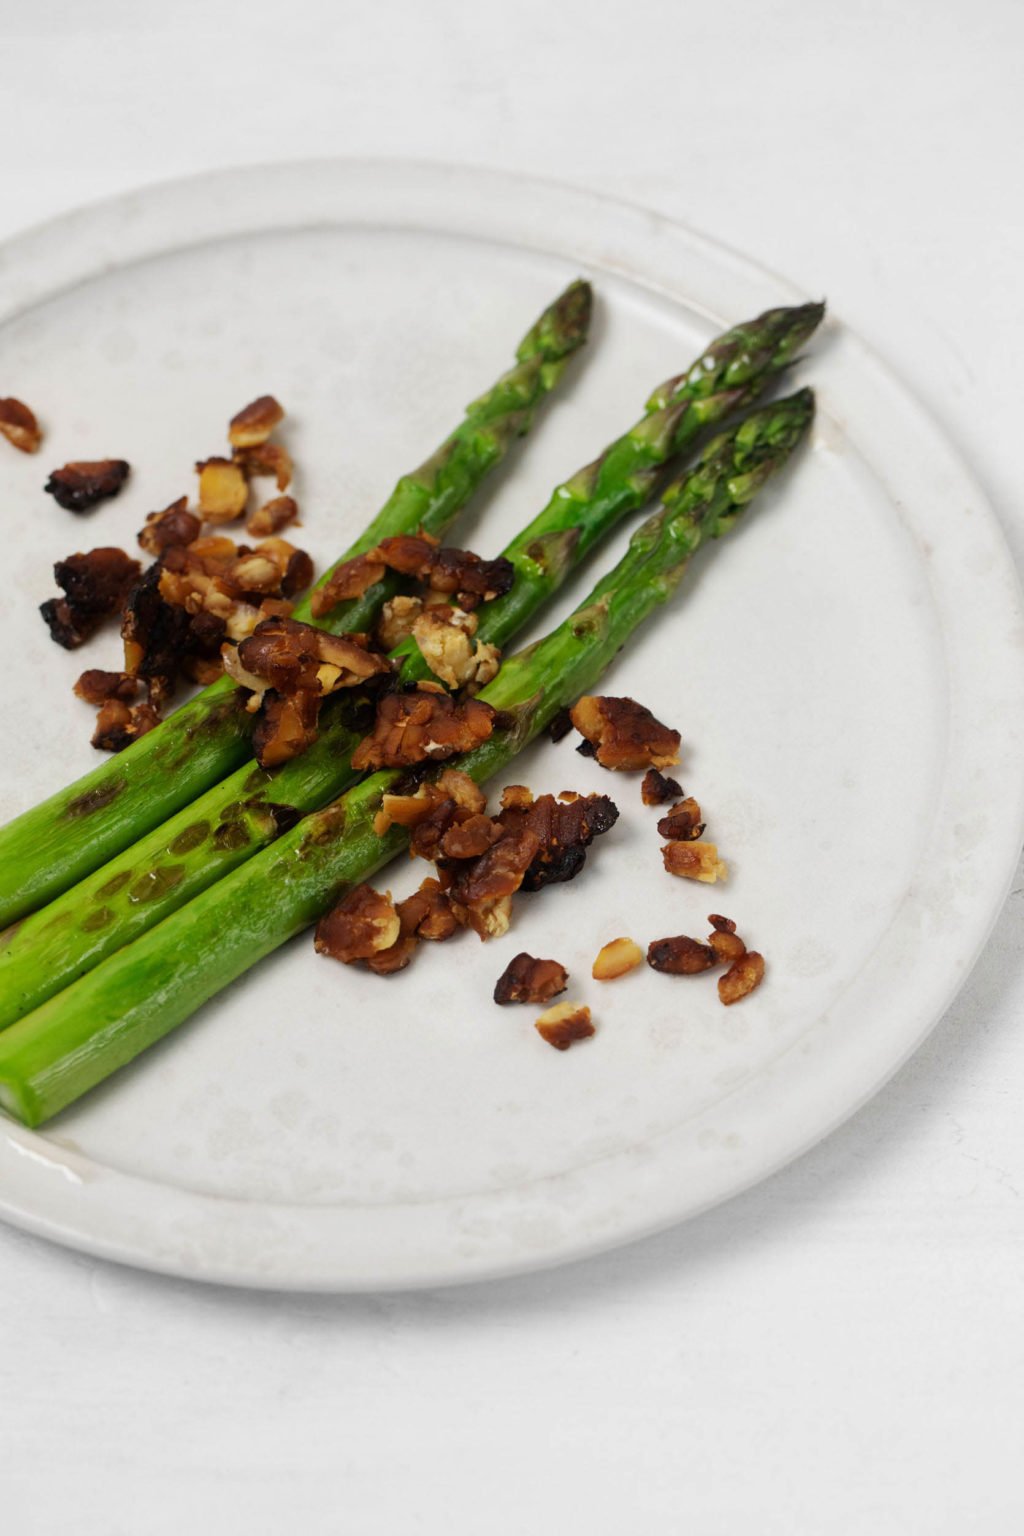 Green asparagus spears have been topped with a plant-based, crumbled tempeh "bacon."